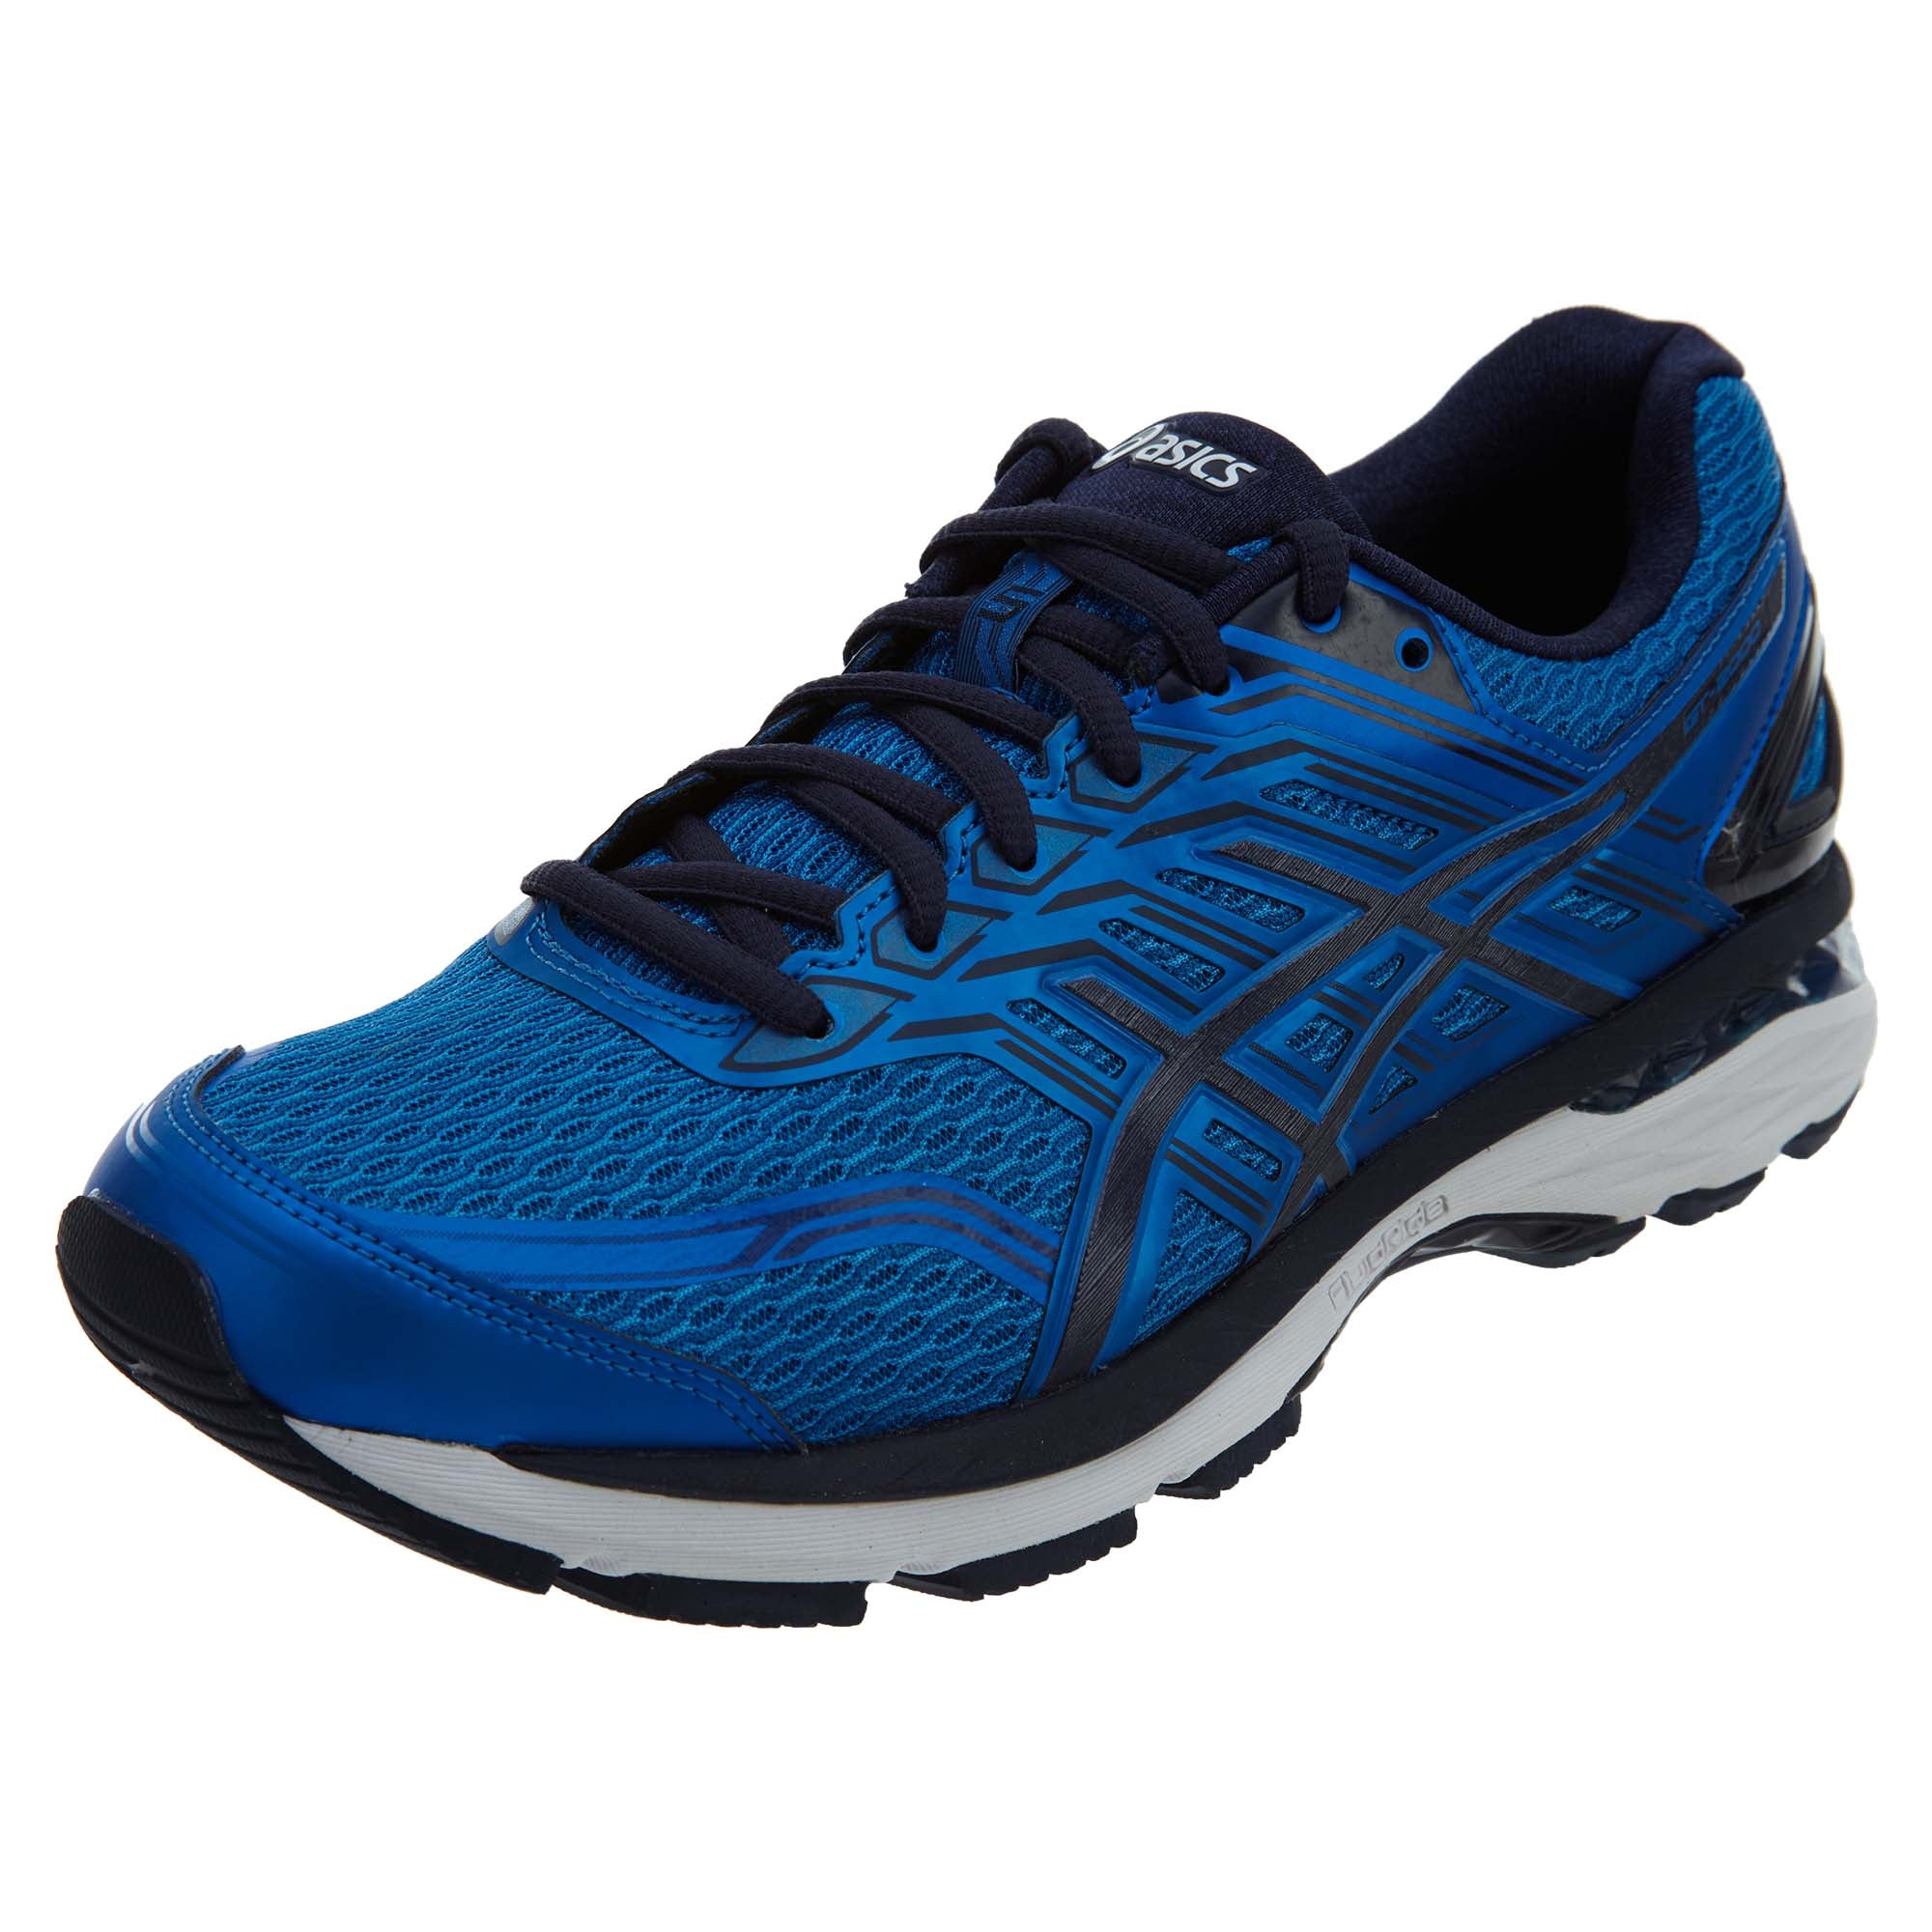 asics t707n review